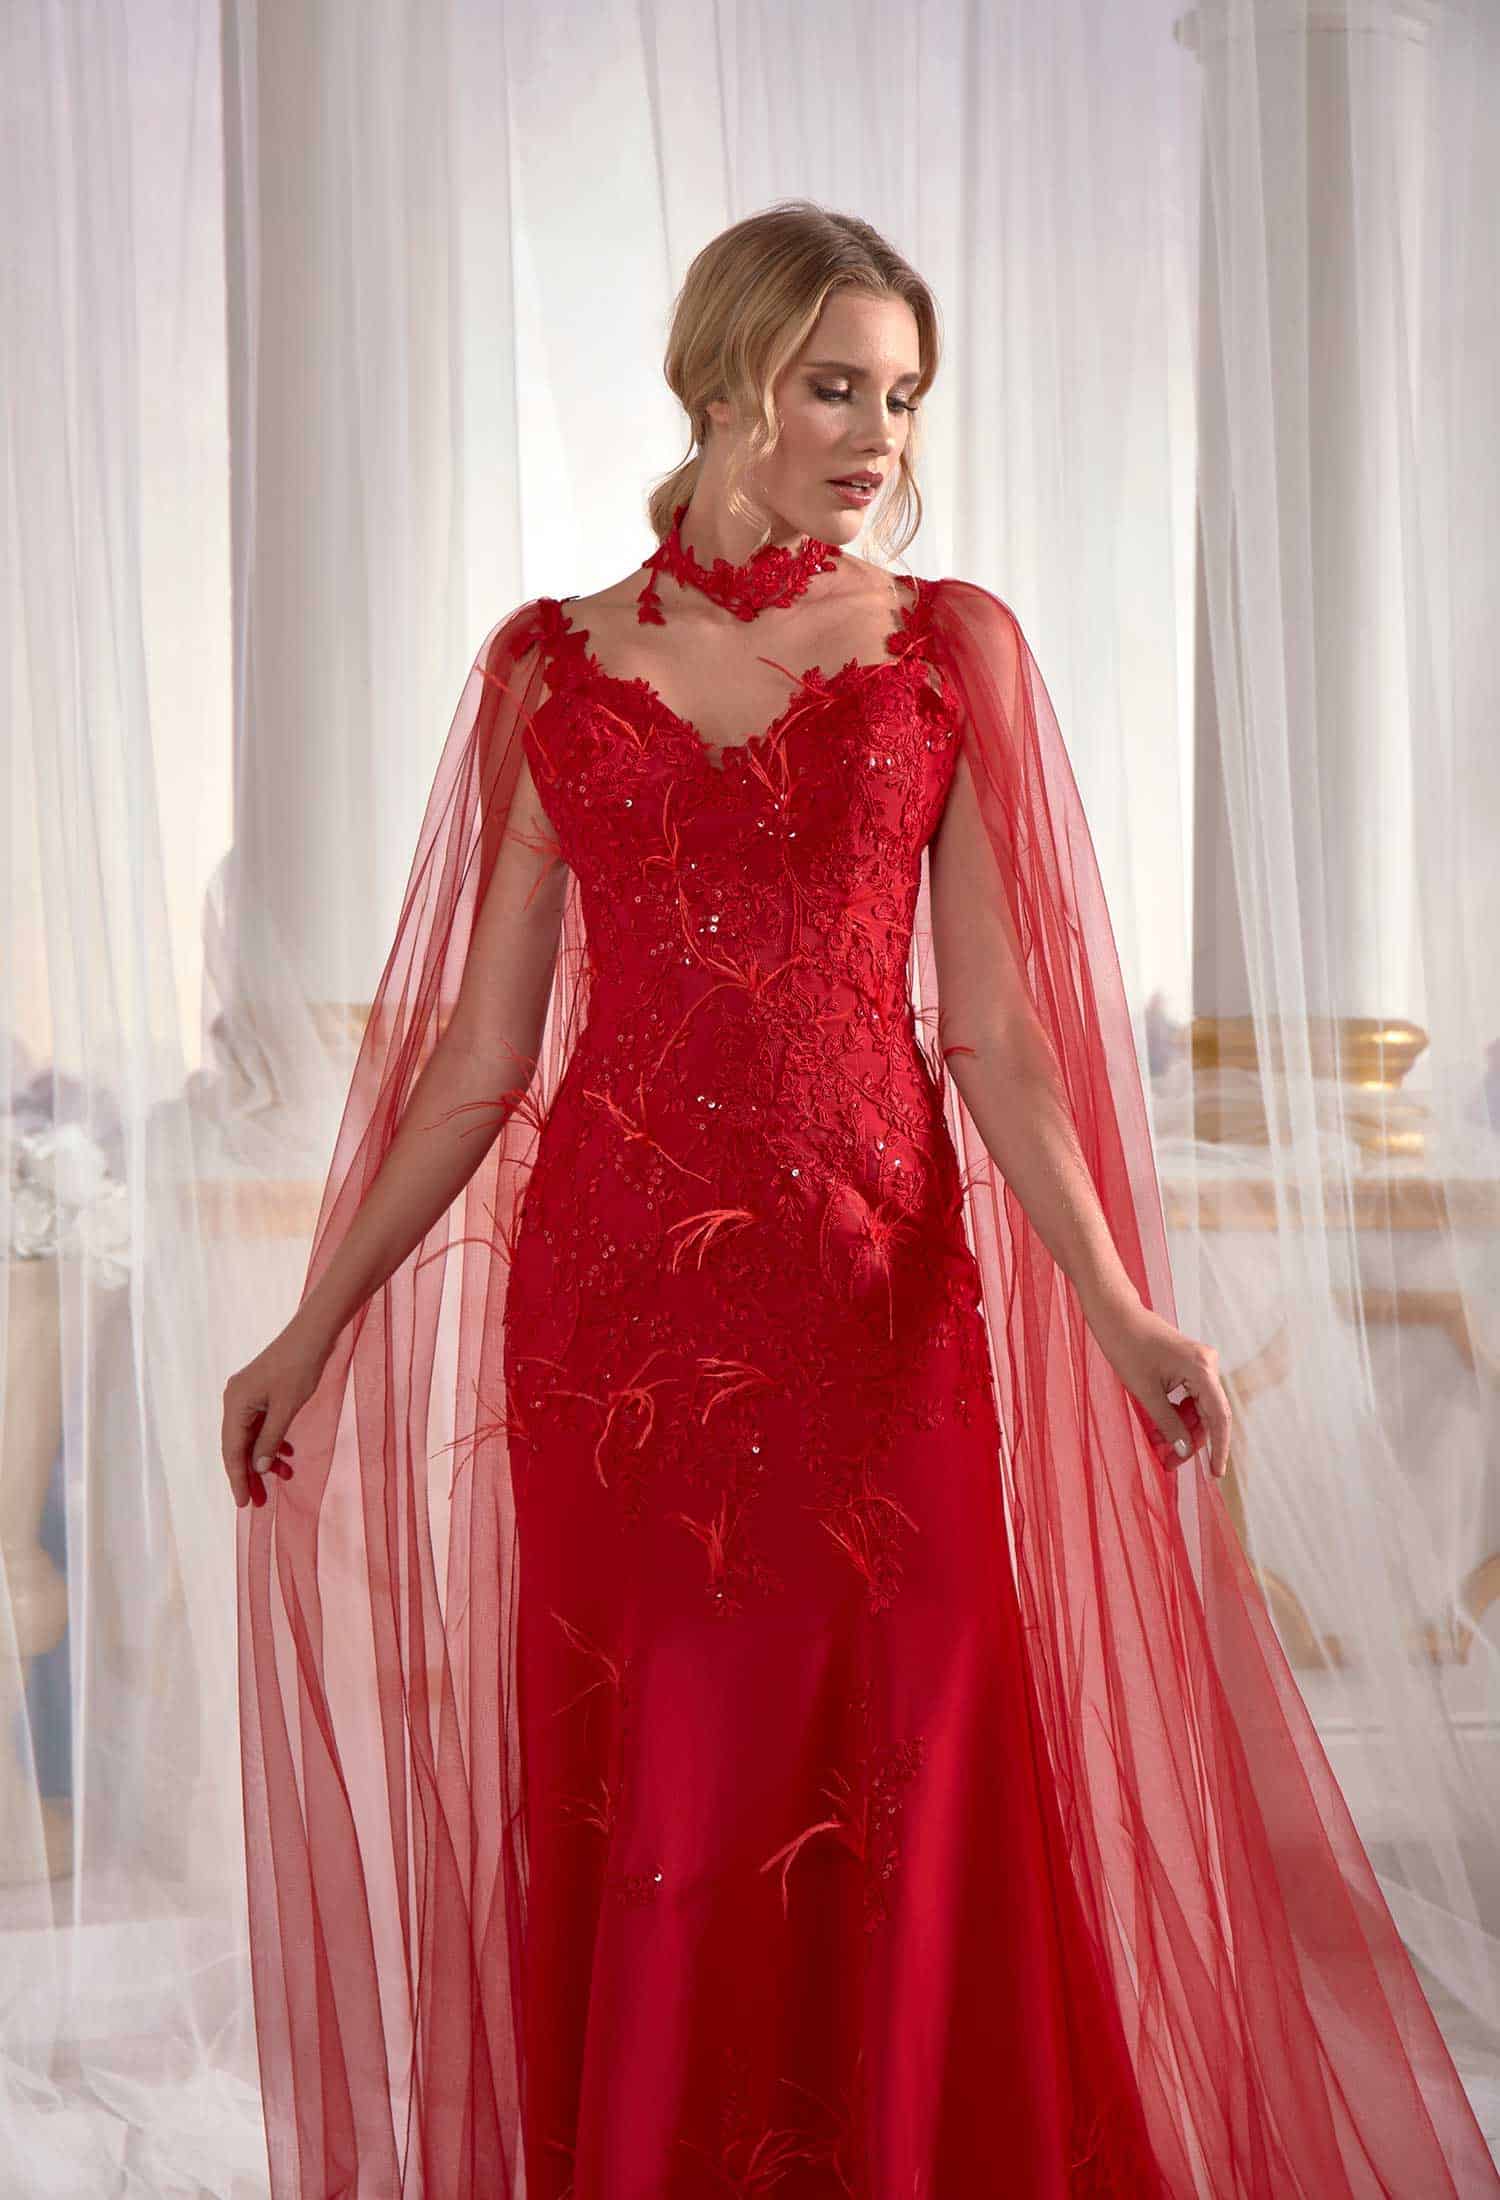 buy prom dresses online Prom dress boutiques Red Prom Dress Mermaid With Flutter Flower Tulle Cape Back Tall Soft (2)